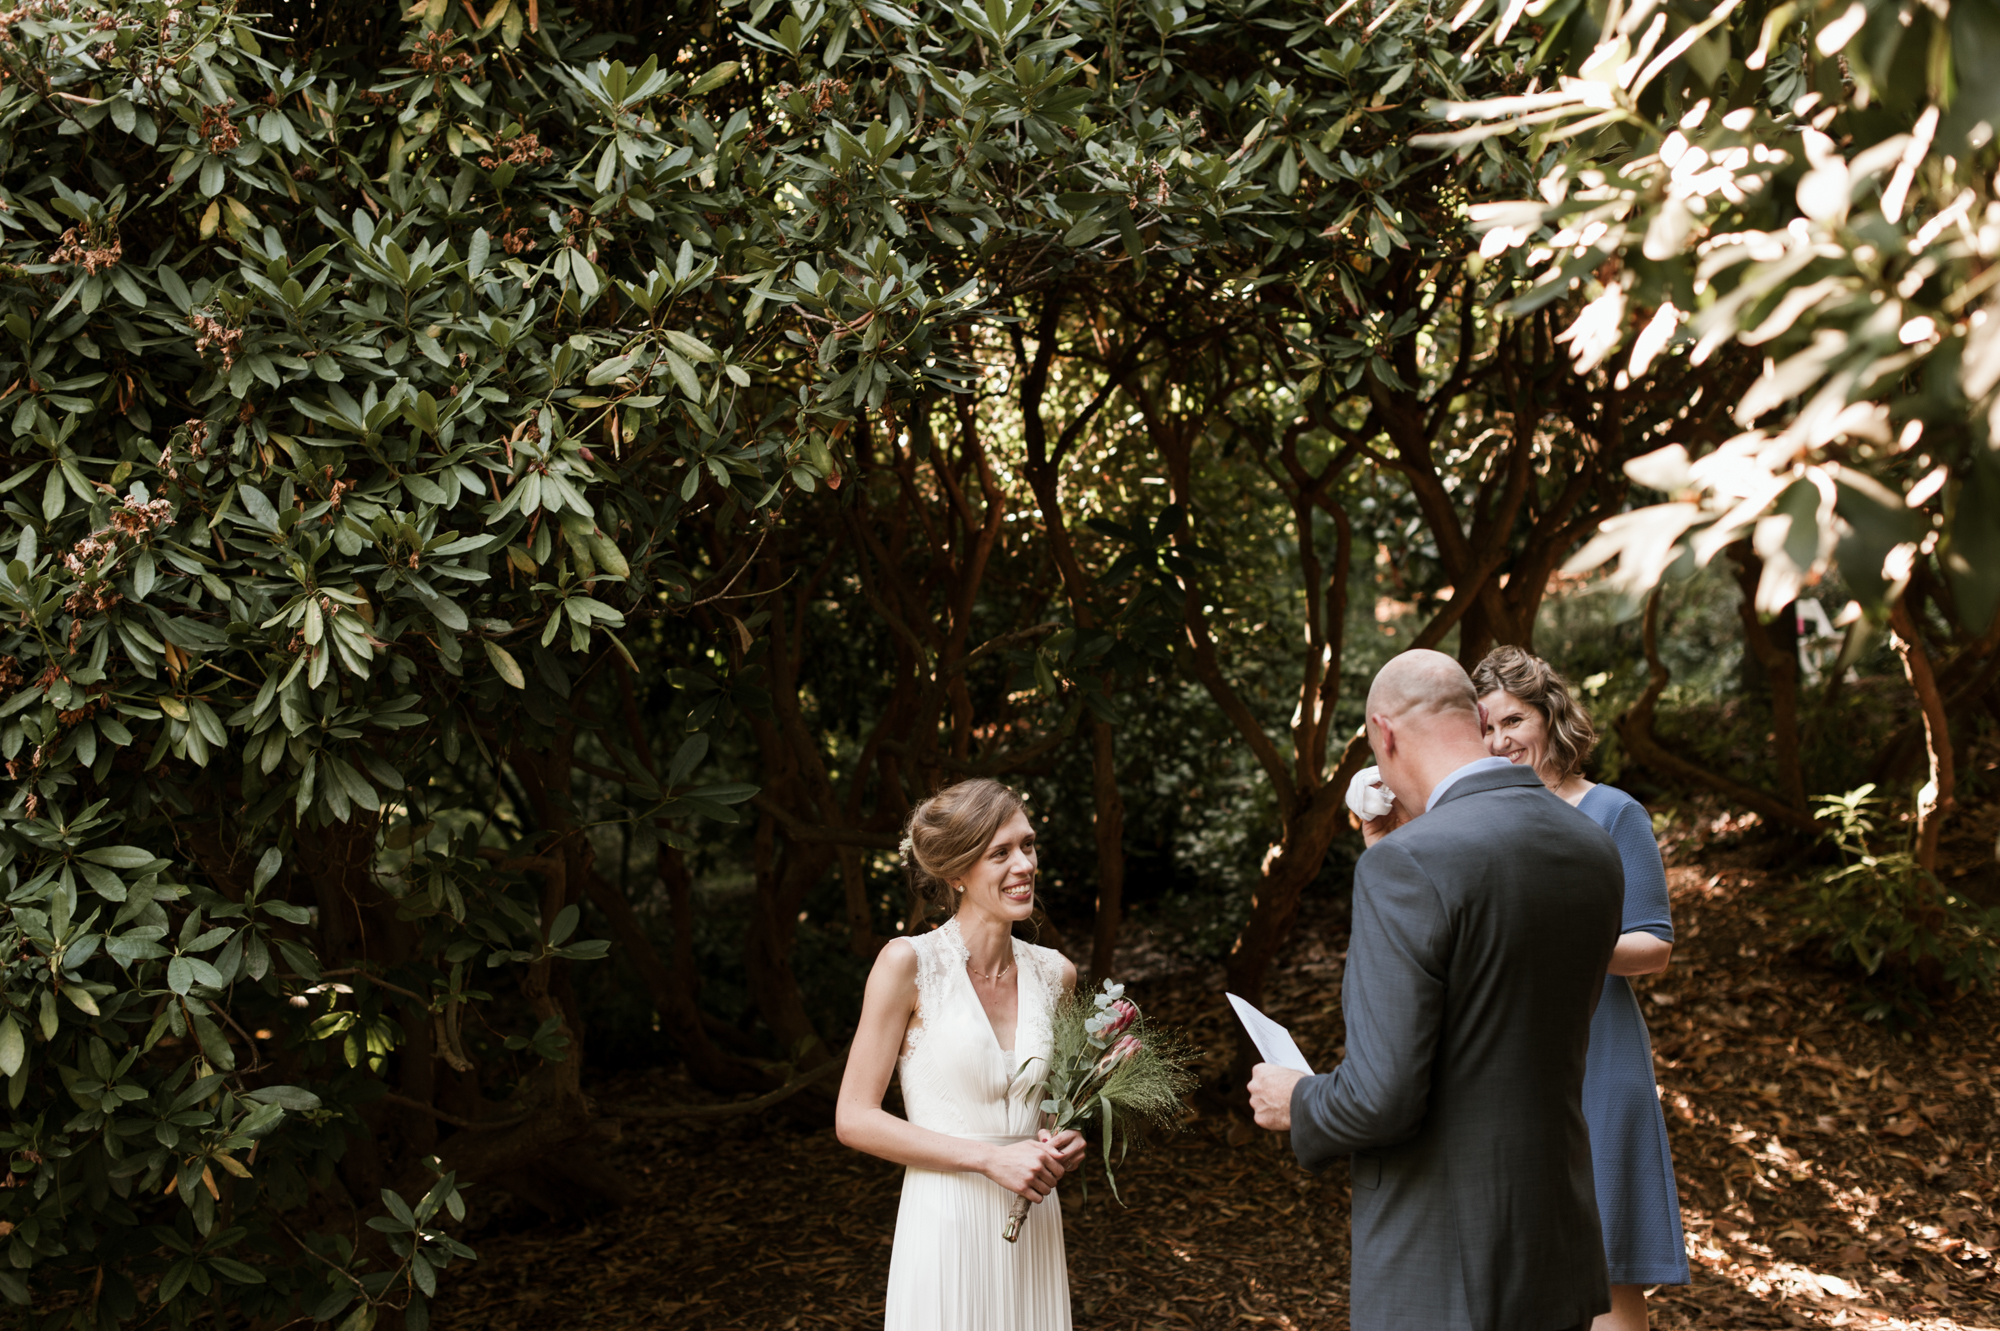 The groom cries as he says his vows. By Laurelhurst Park wedding photographer Briana Morrison